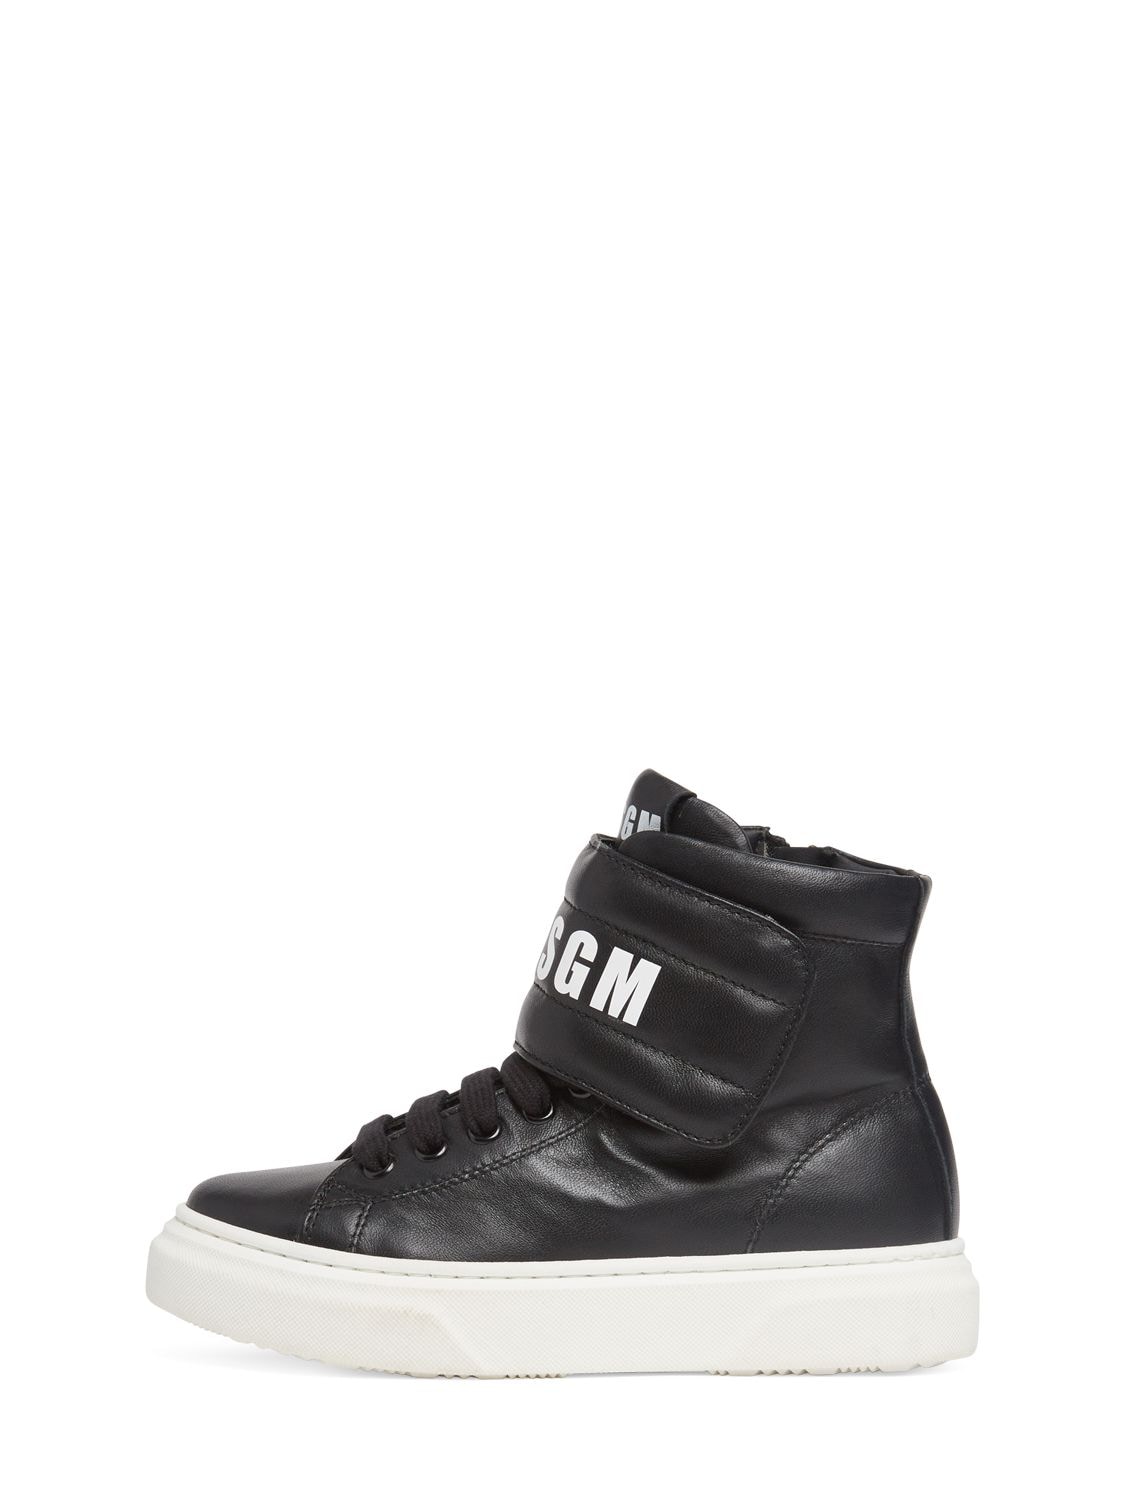 Msgm Kids' Leather High Trainers W/ Printed Logos In Black